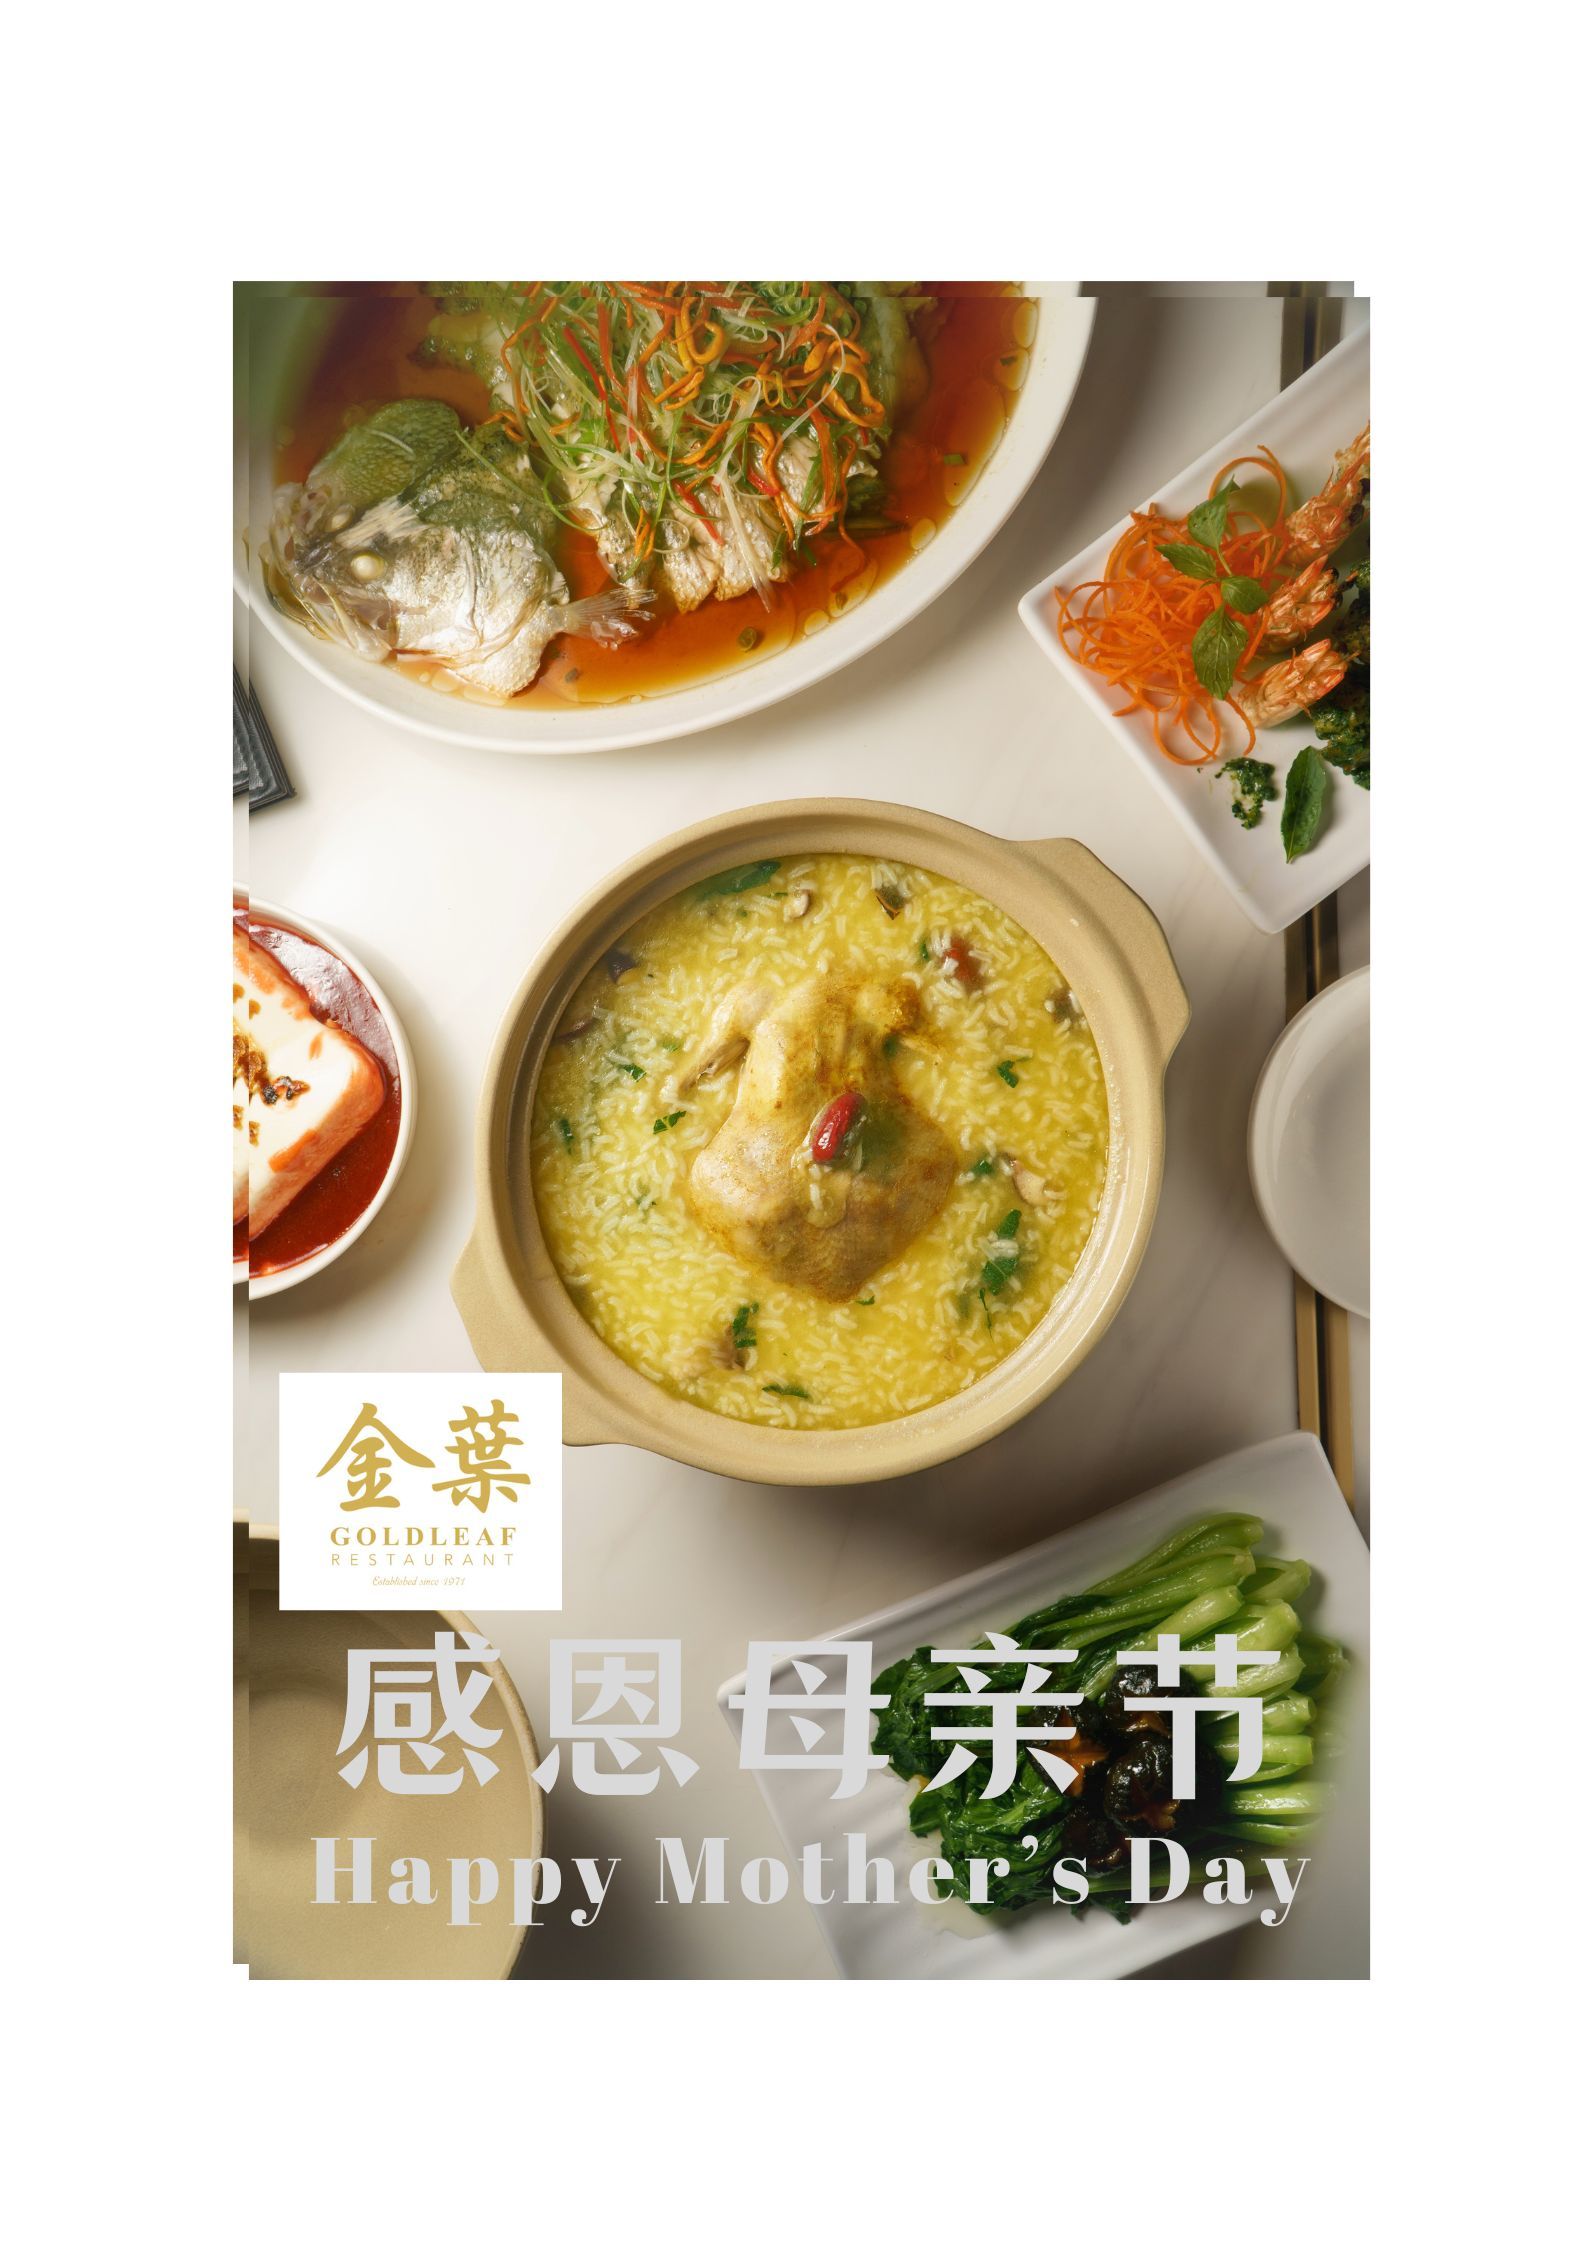 Mother's Day Set 母情節套餐 (4-5pax)